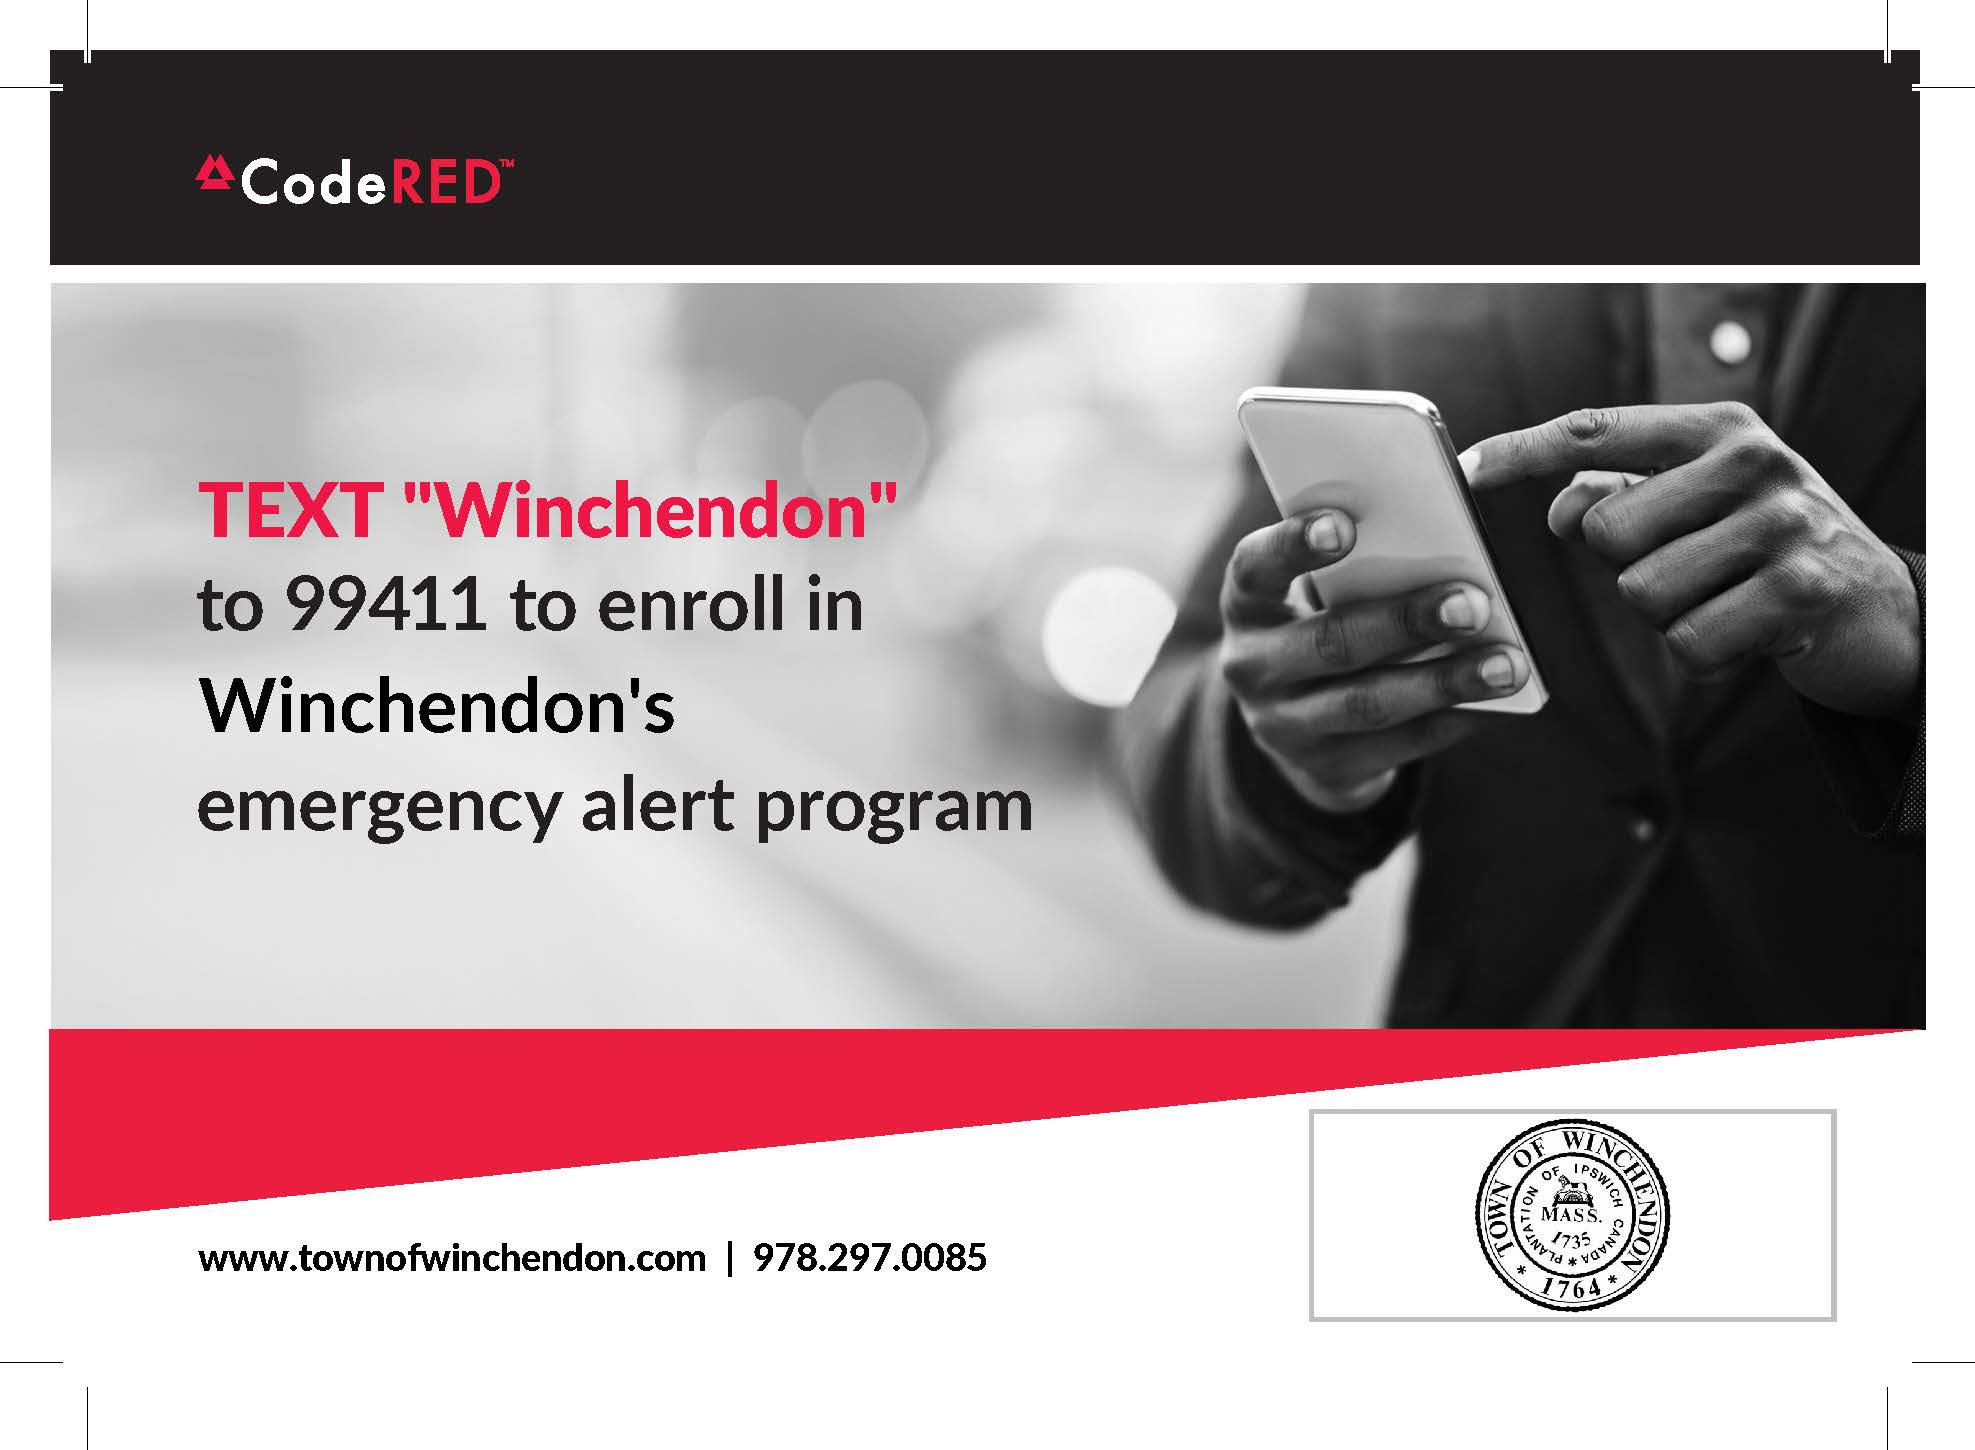 text Winchendon to 99411 to enroll in code red